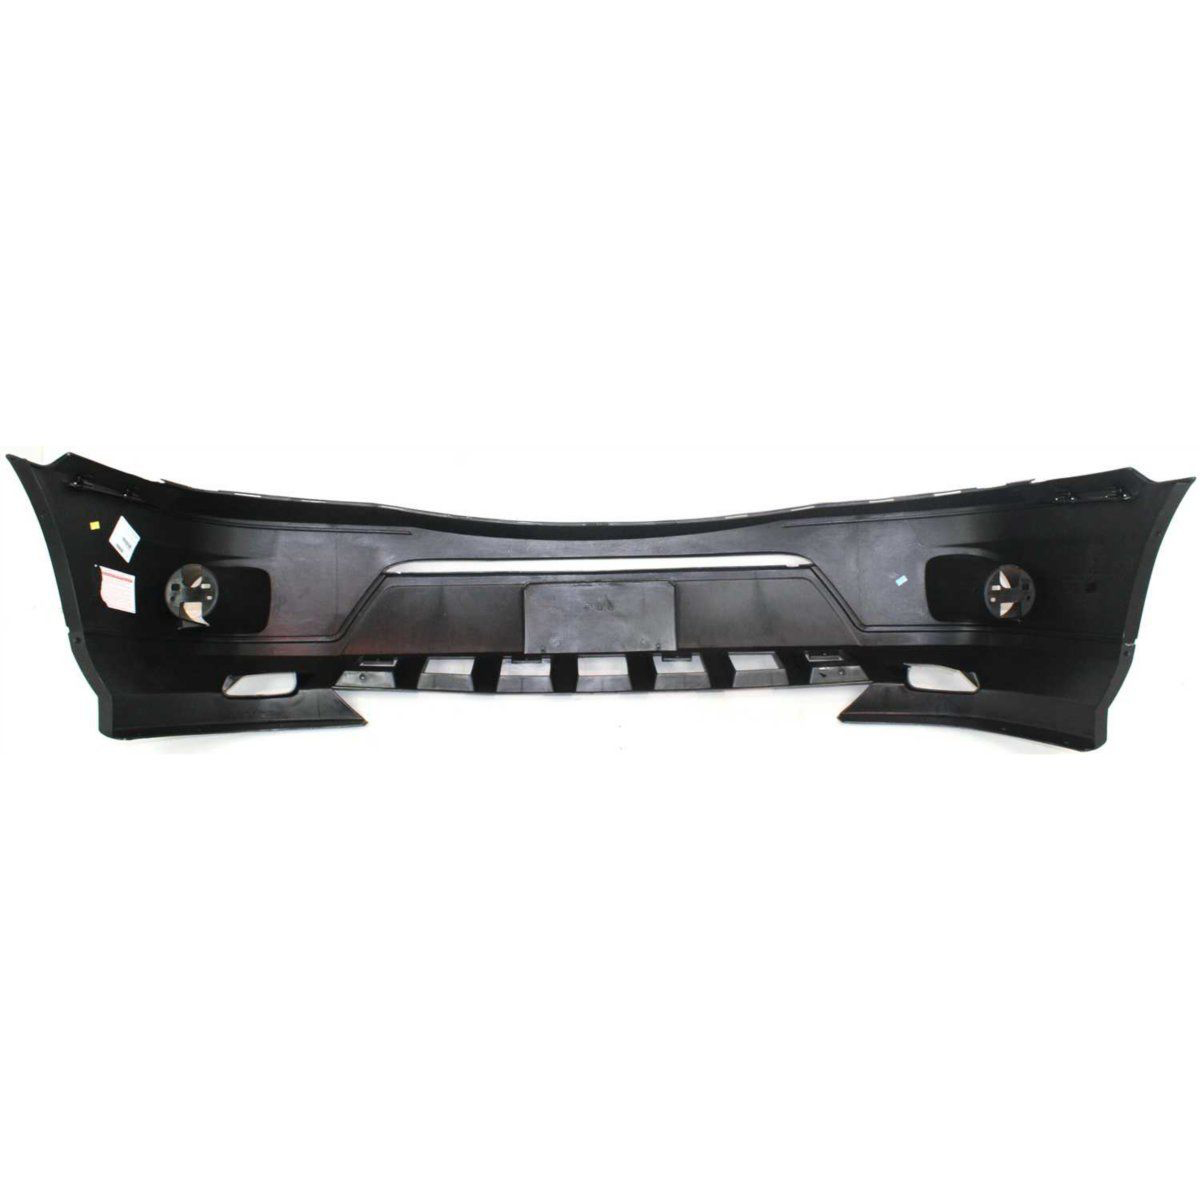 2002-2007 BUICK RENDEZVOUS Front Bumper Cover Painted to Match